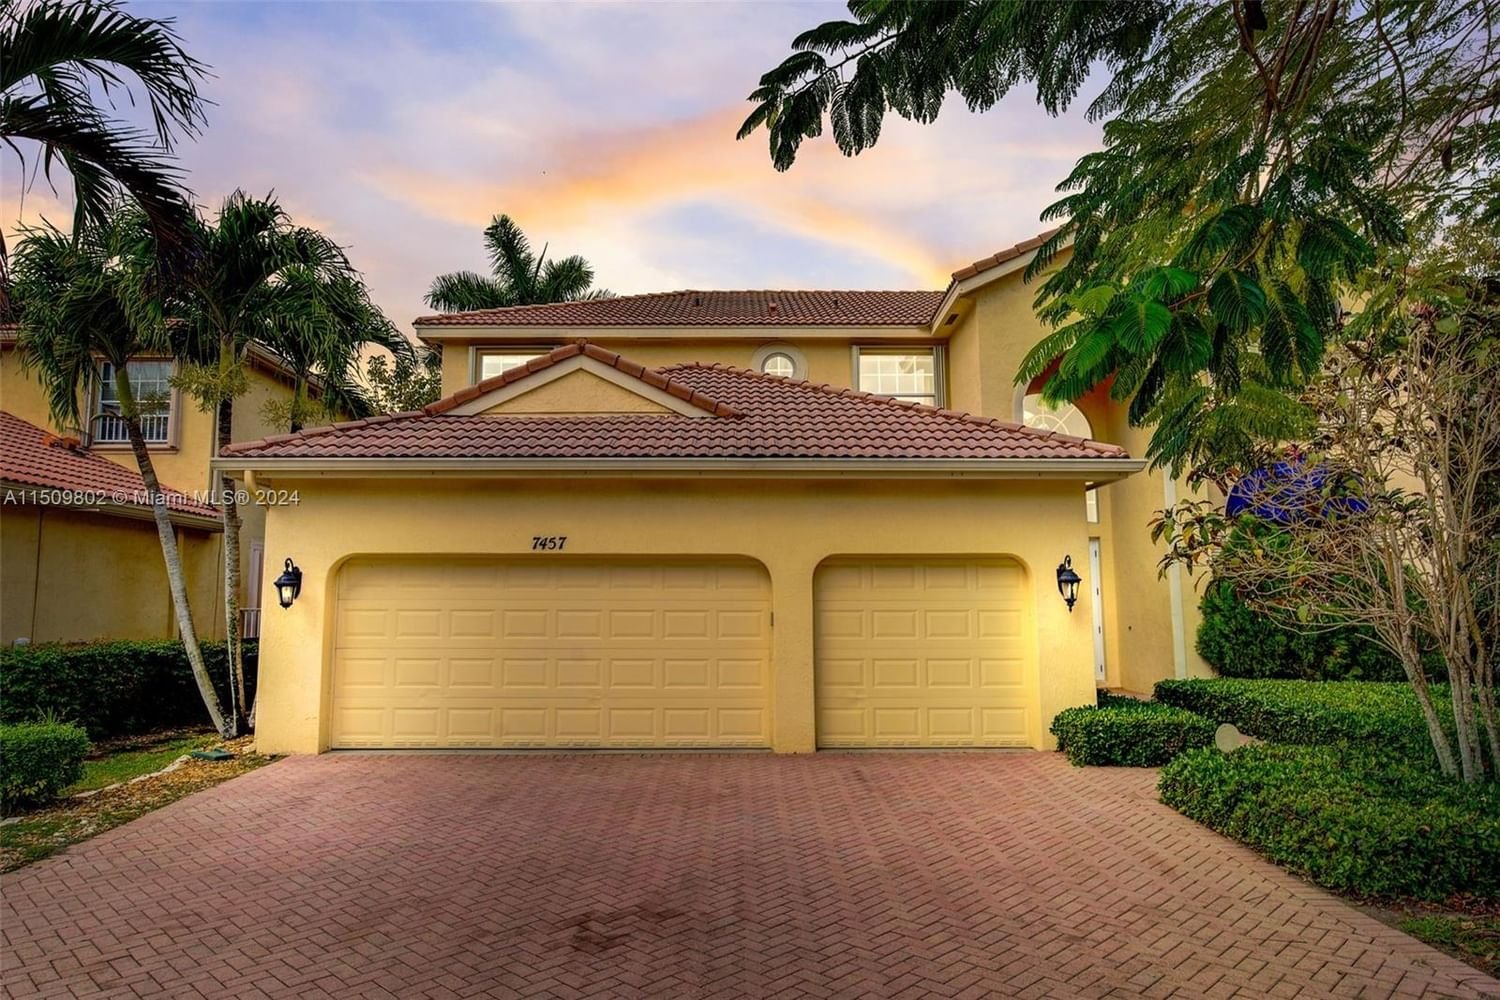 Real estate property located at 7457 51 st Way, Broward County, Country Woods, Coconut Creek, FL